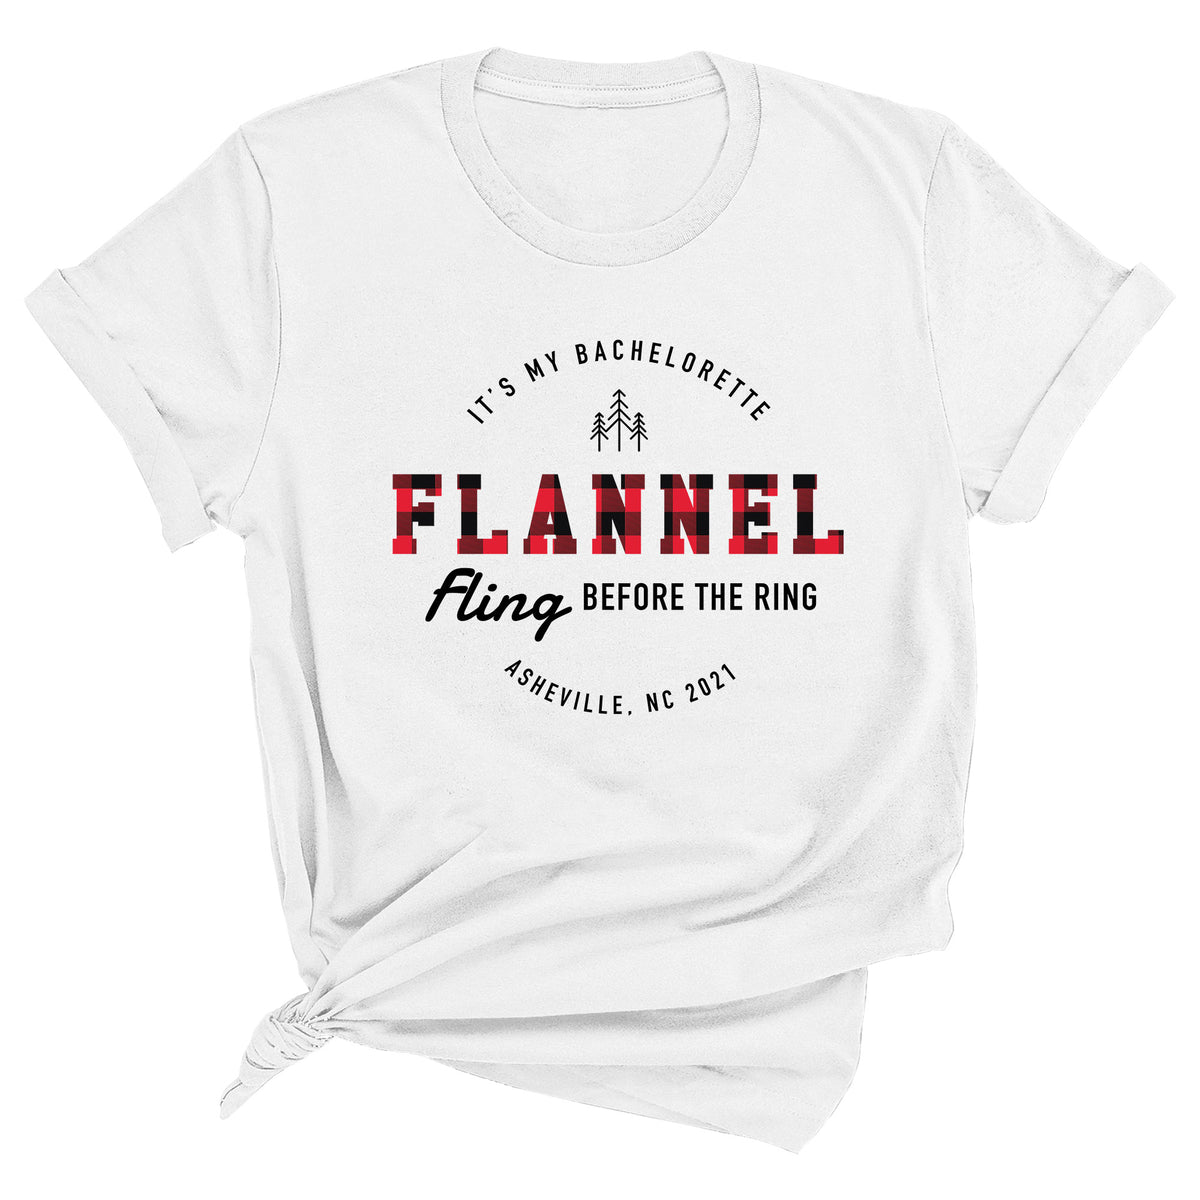 Flannel Fling Before the Ring with Custom Premium Unisex T-Shirt